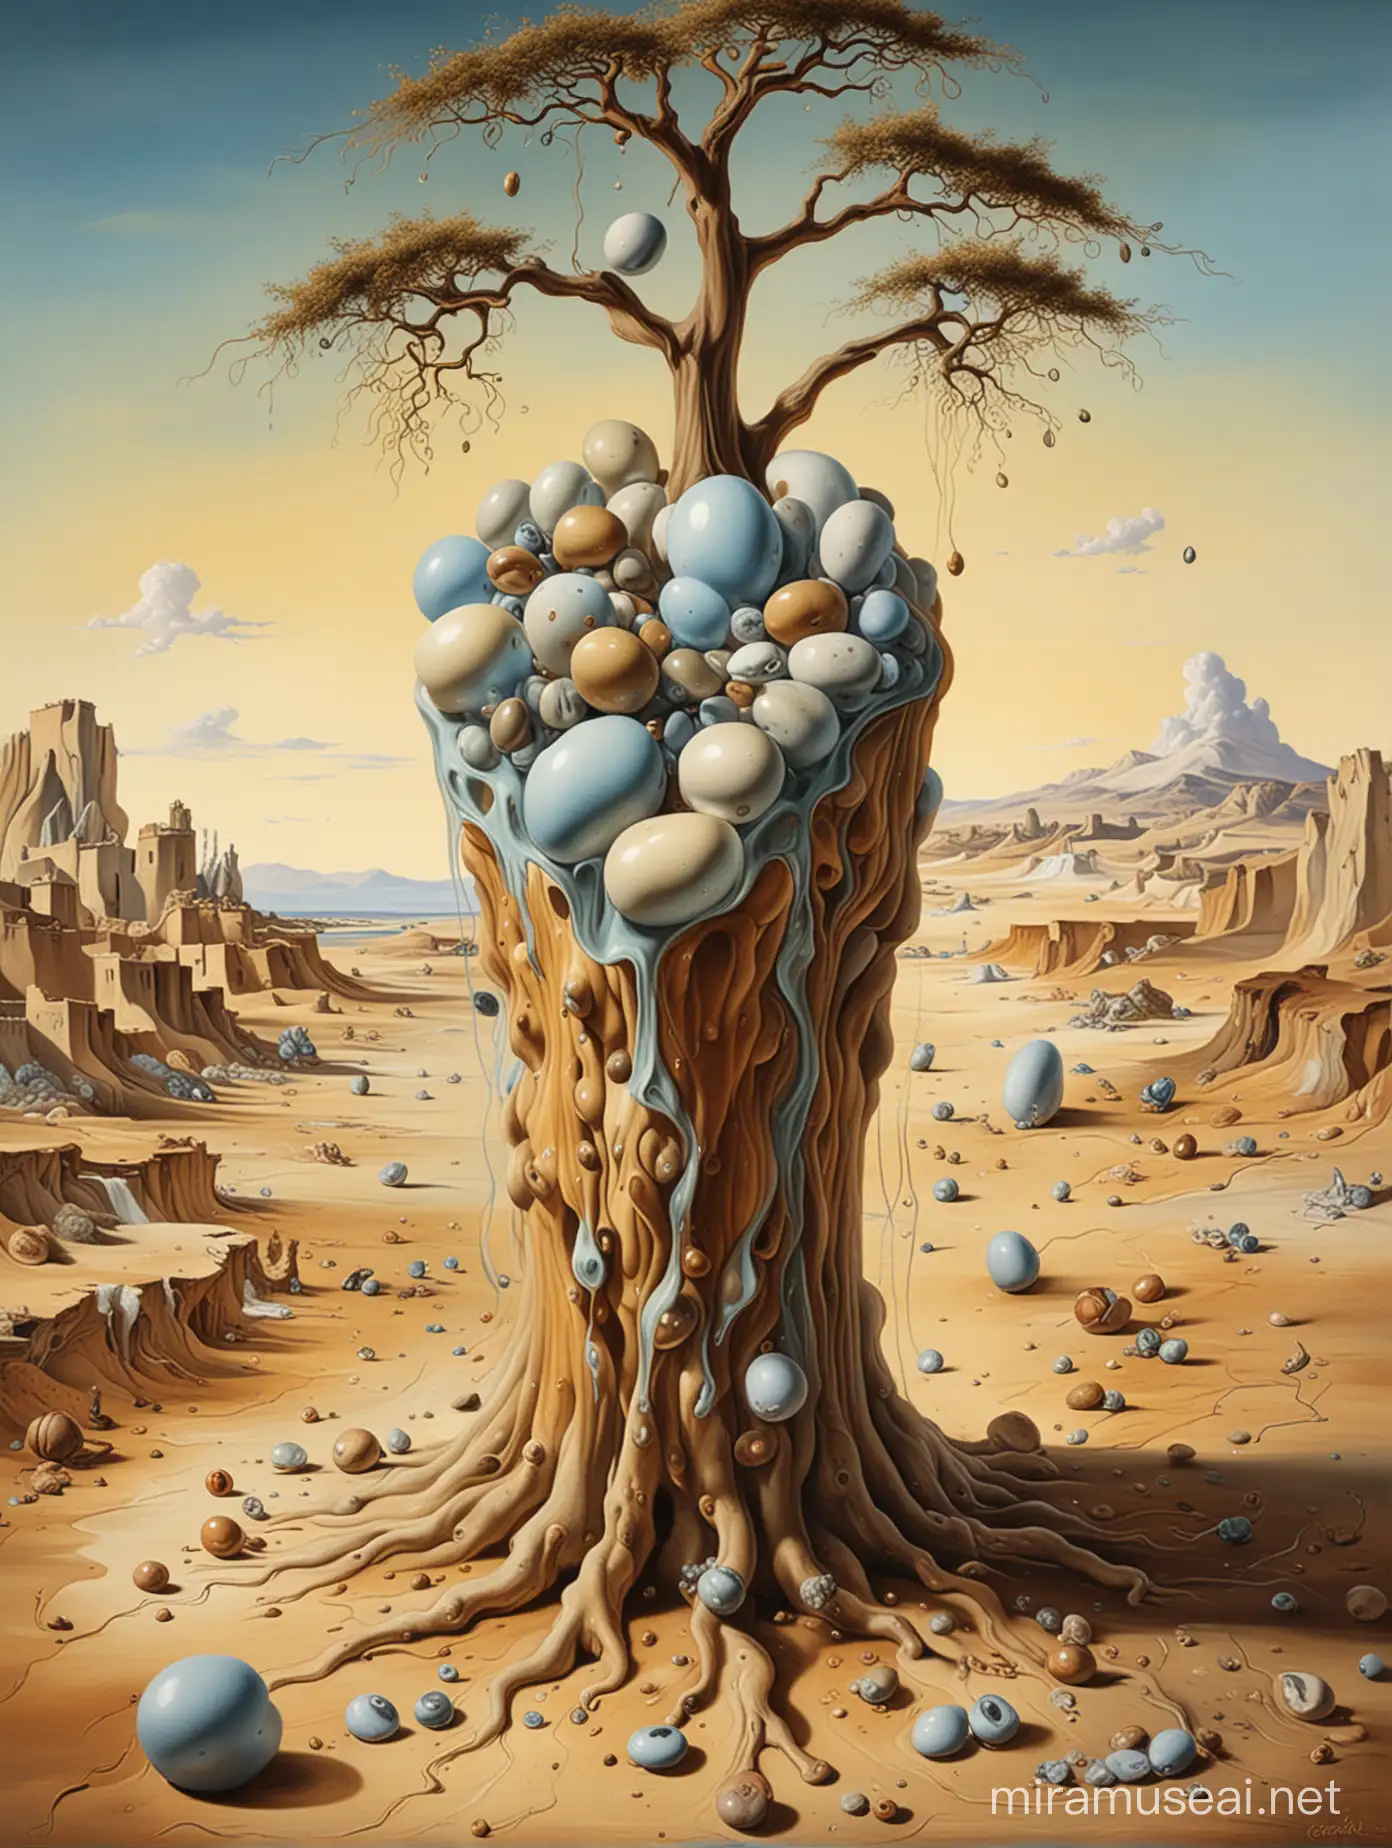 Highly detailed painting based on ((('Soft Construction with Boiled Beans' by Salvador Dali, 1936))), a fantastical creature balances on a tree trunk in a desert, use muted pastel colors only, high quality